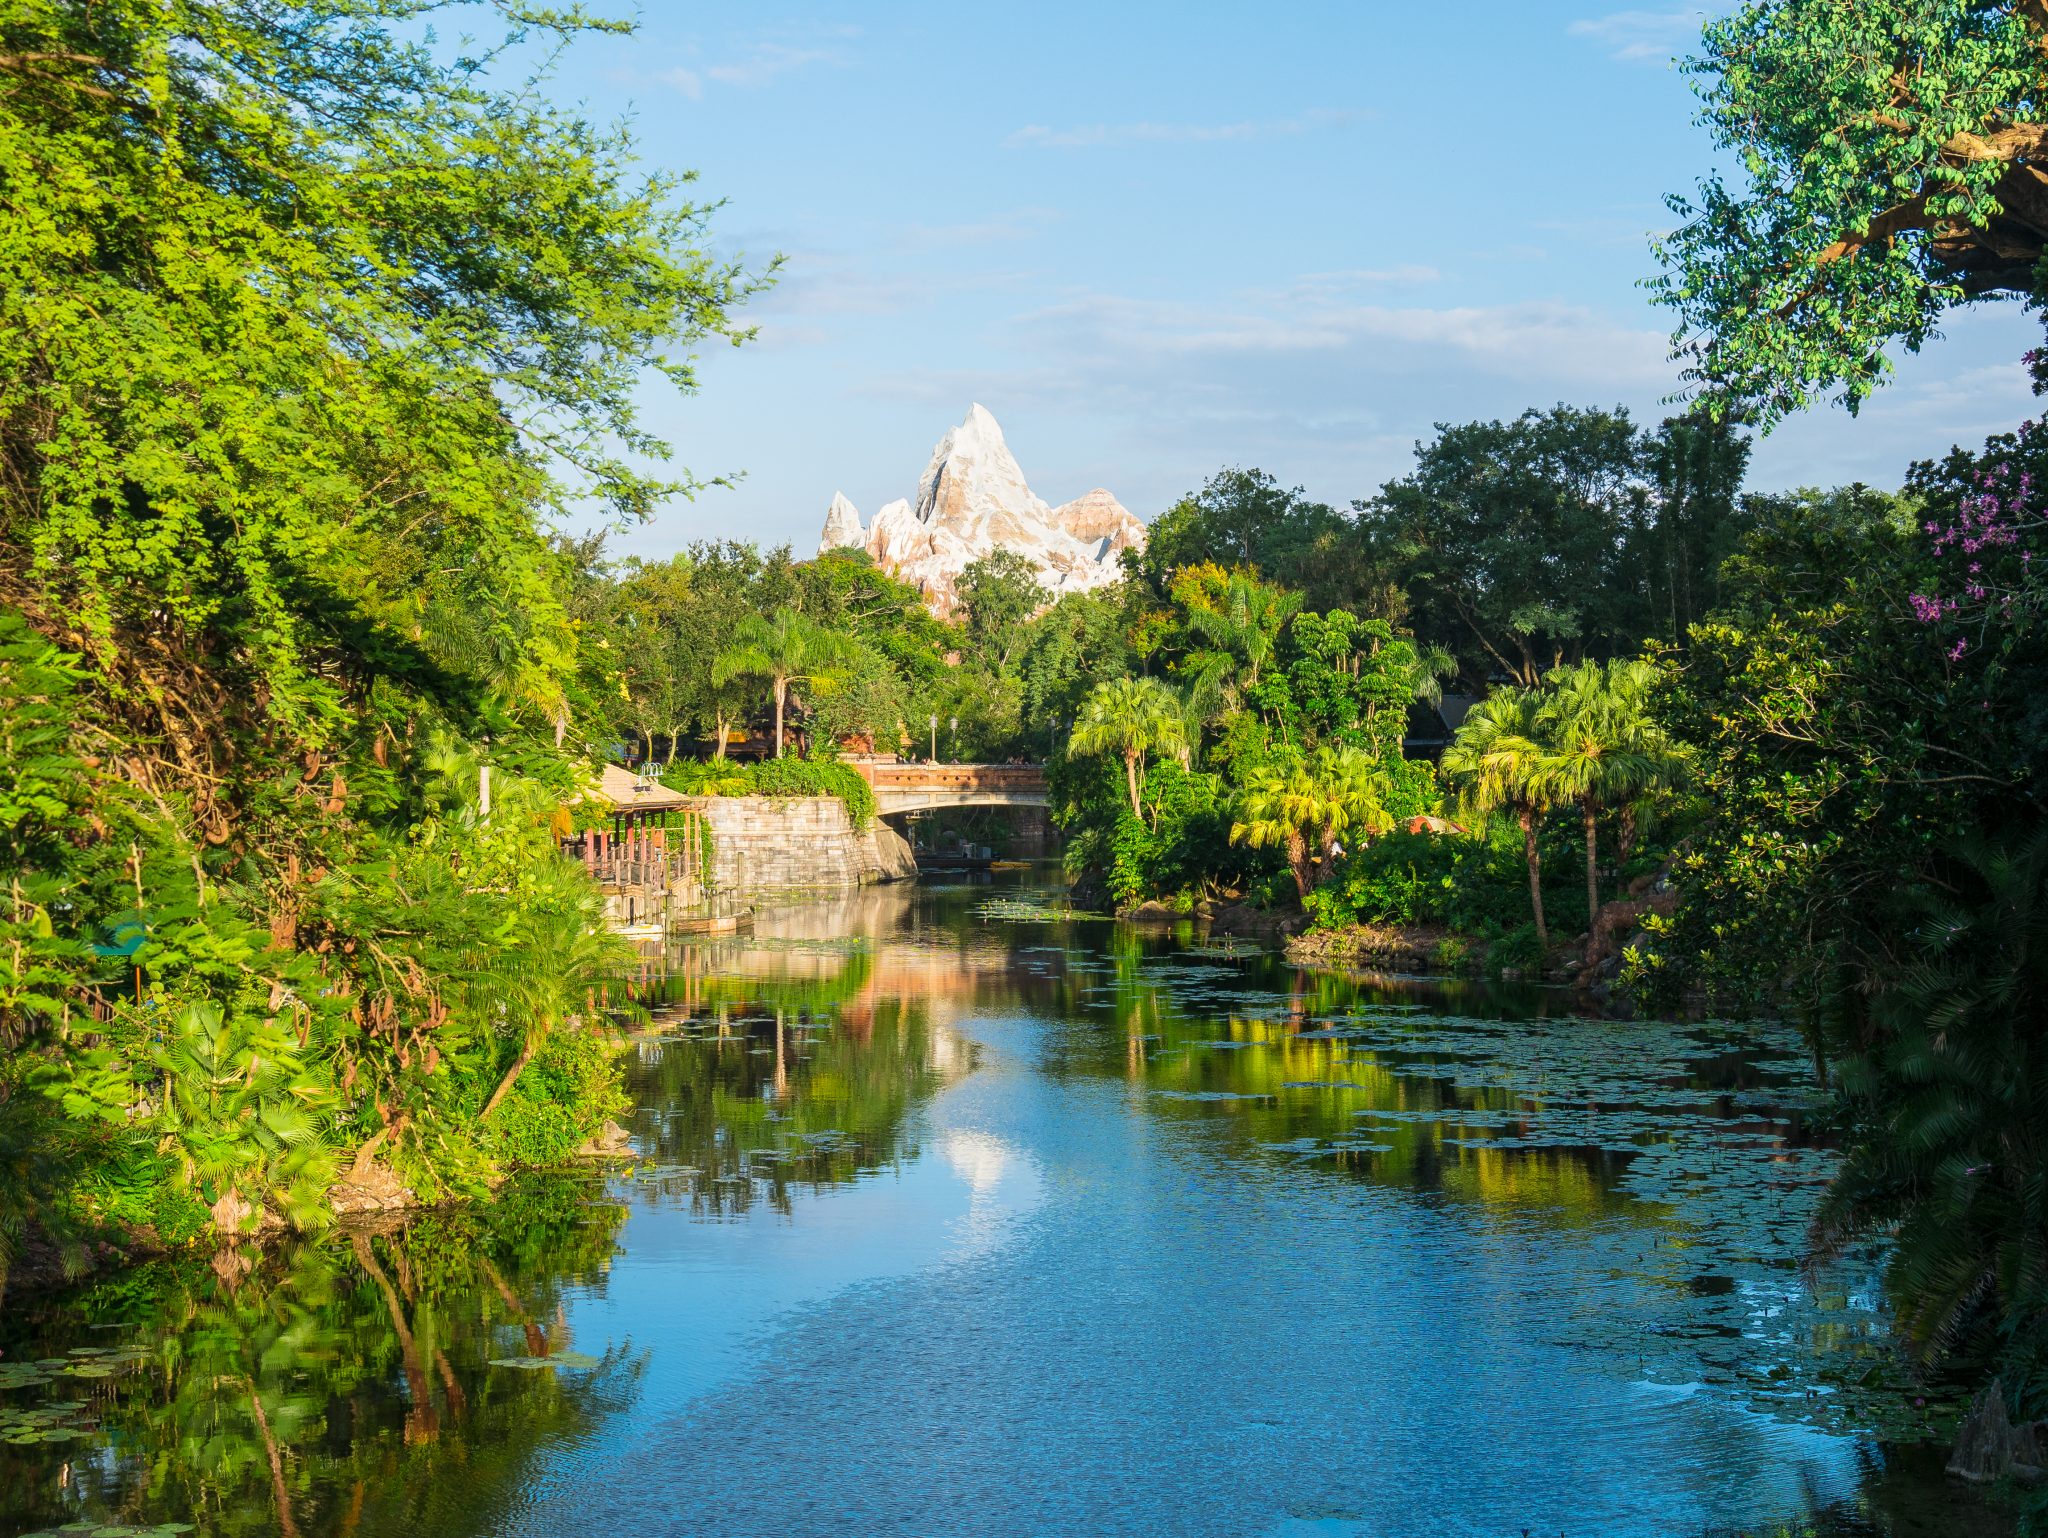 River at Disney’s Animal Kingdom with Expedition Everest in the background